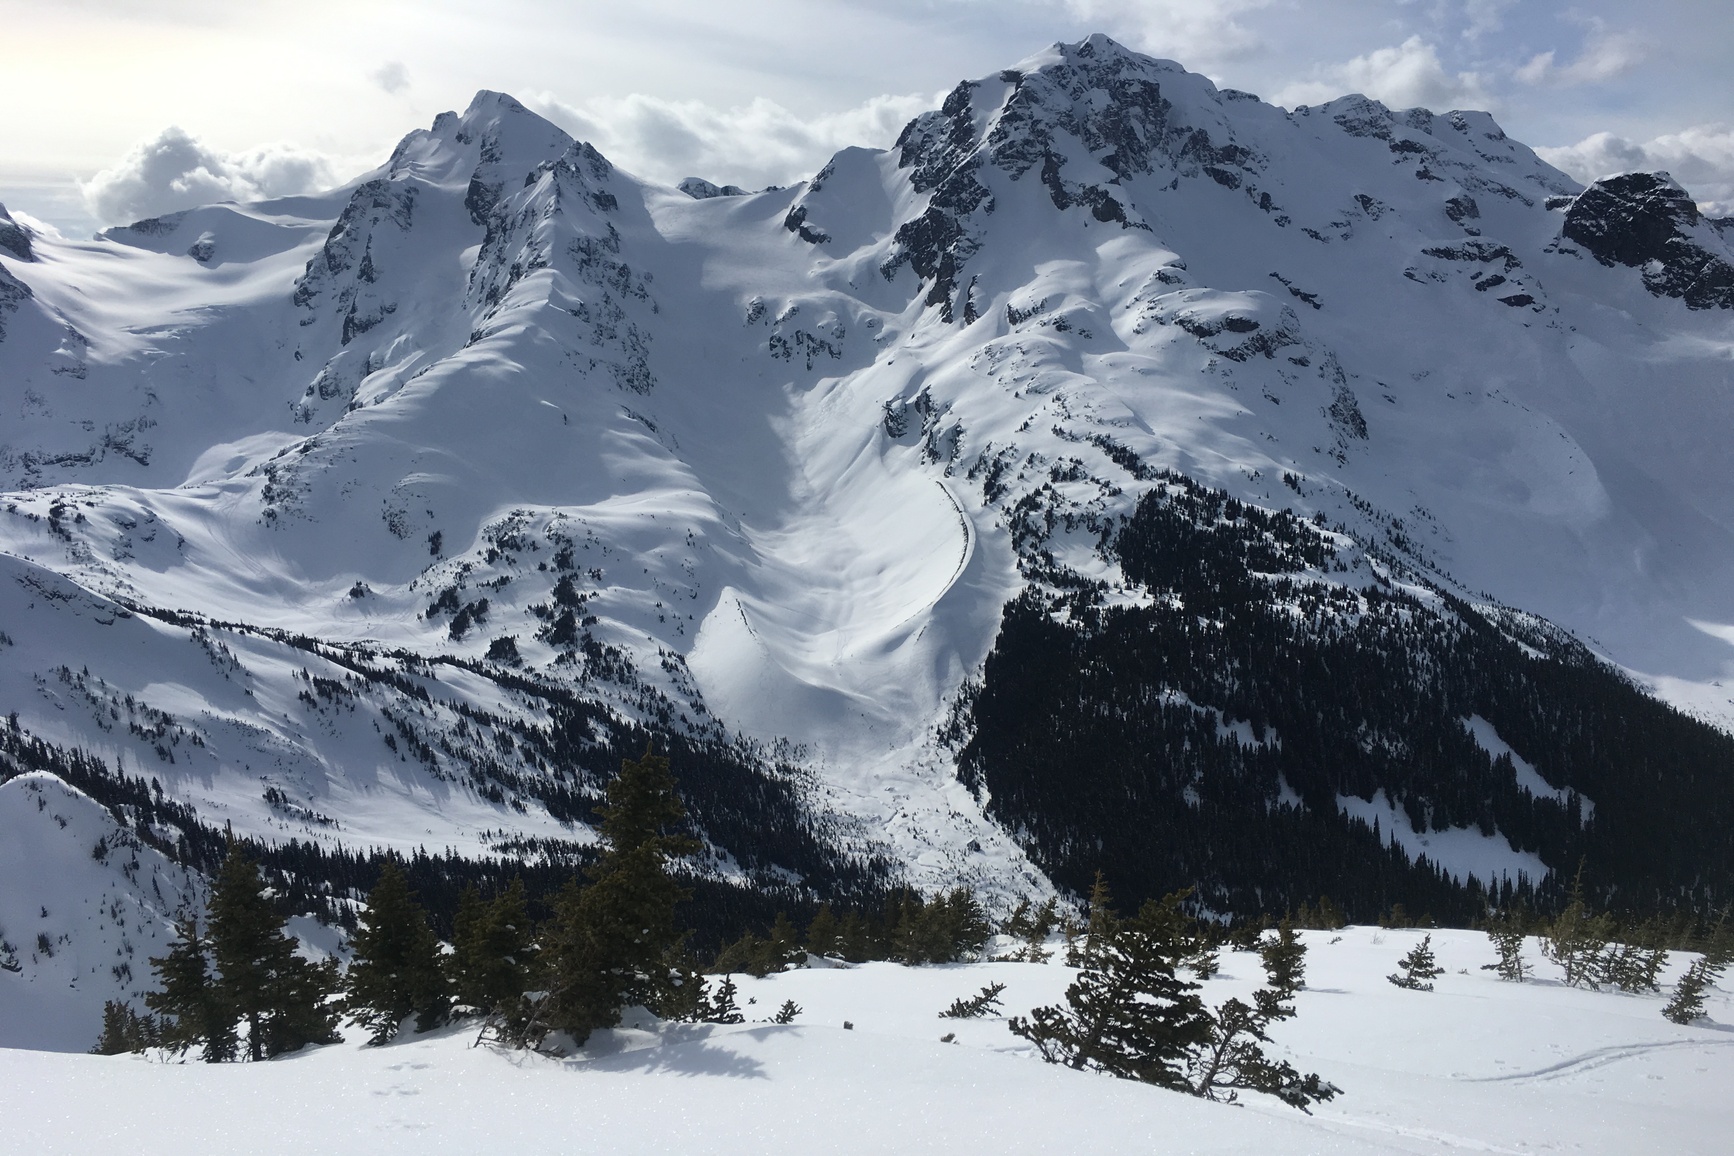 Distant view of a popular winter ski touring zone within the Cerise Creek Conservancy